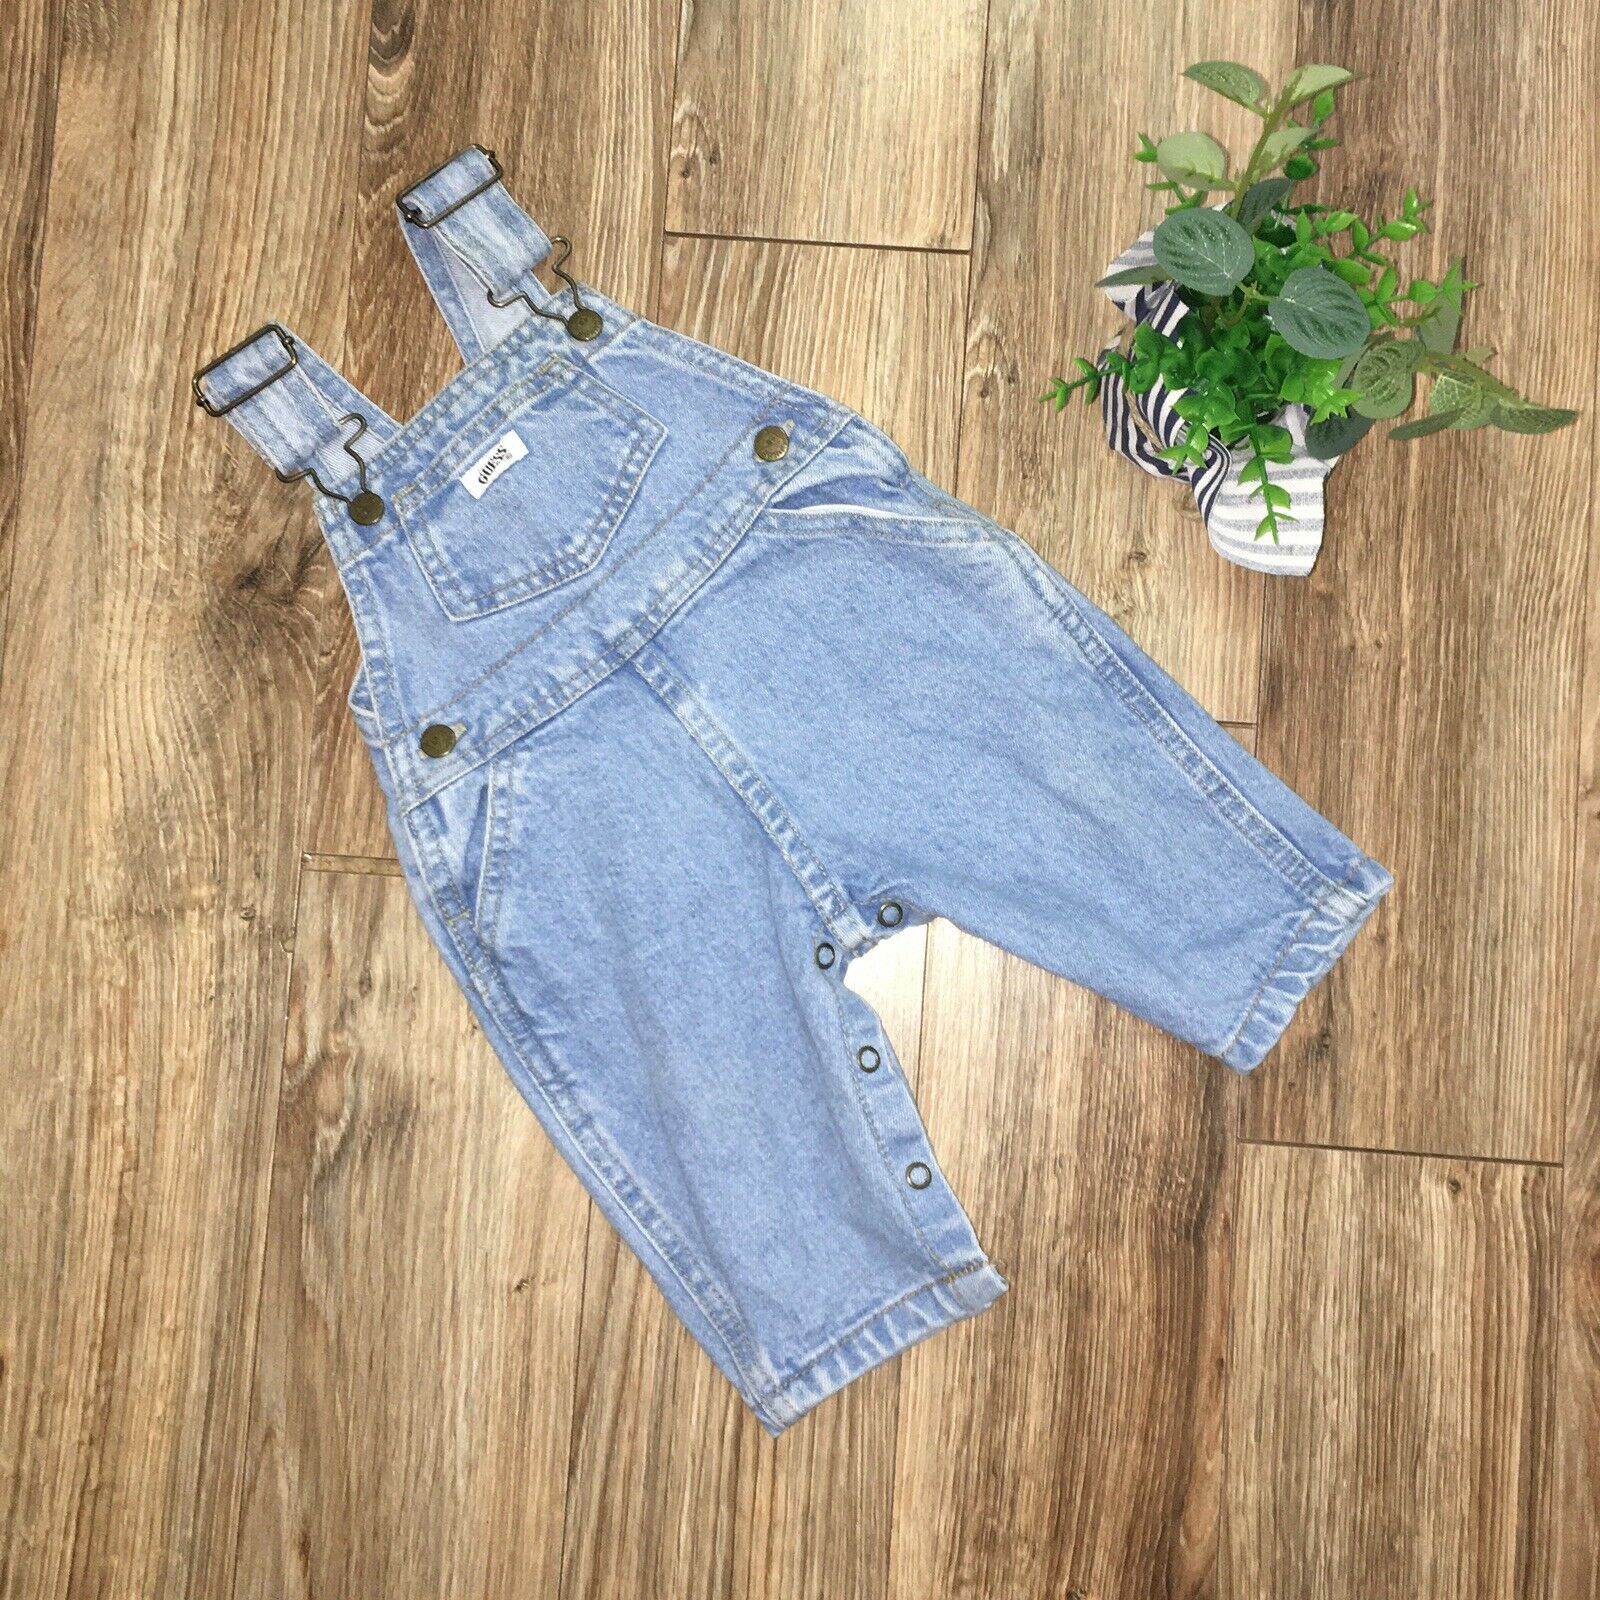 Vtg 90's Guess Baby Triangle Logo Denim Bibs Overalls 6 M Snap Button